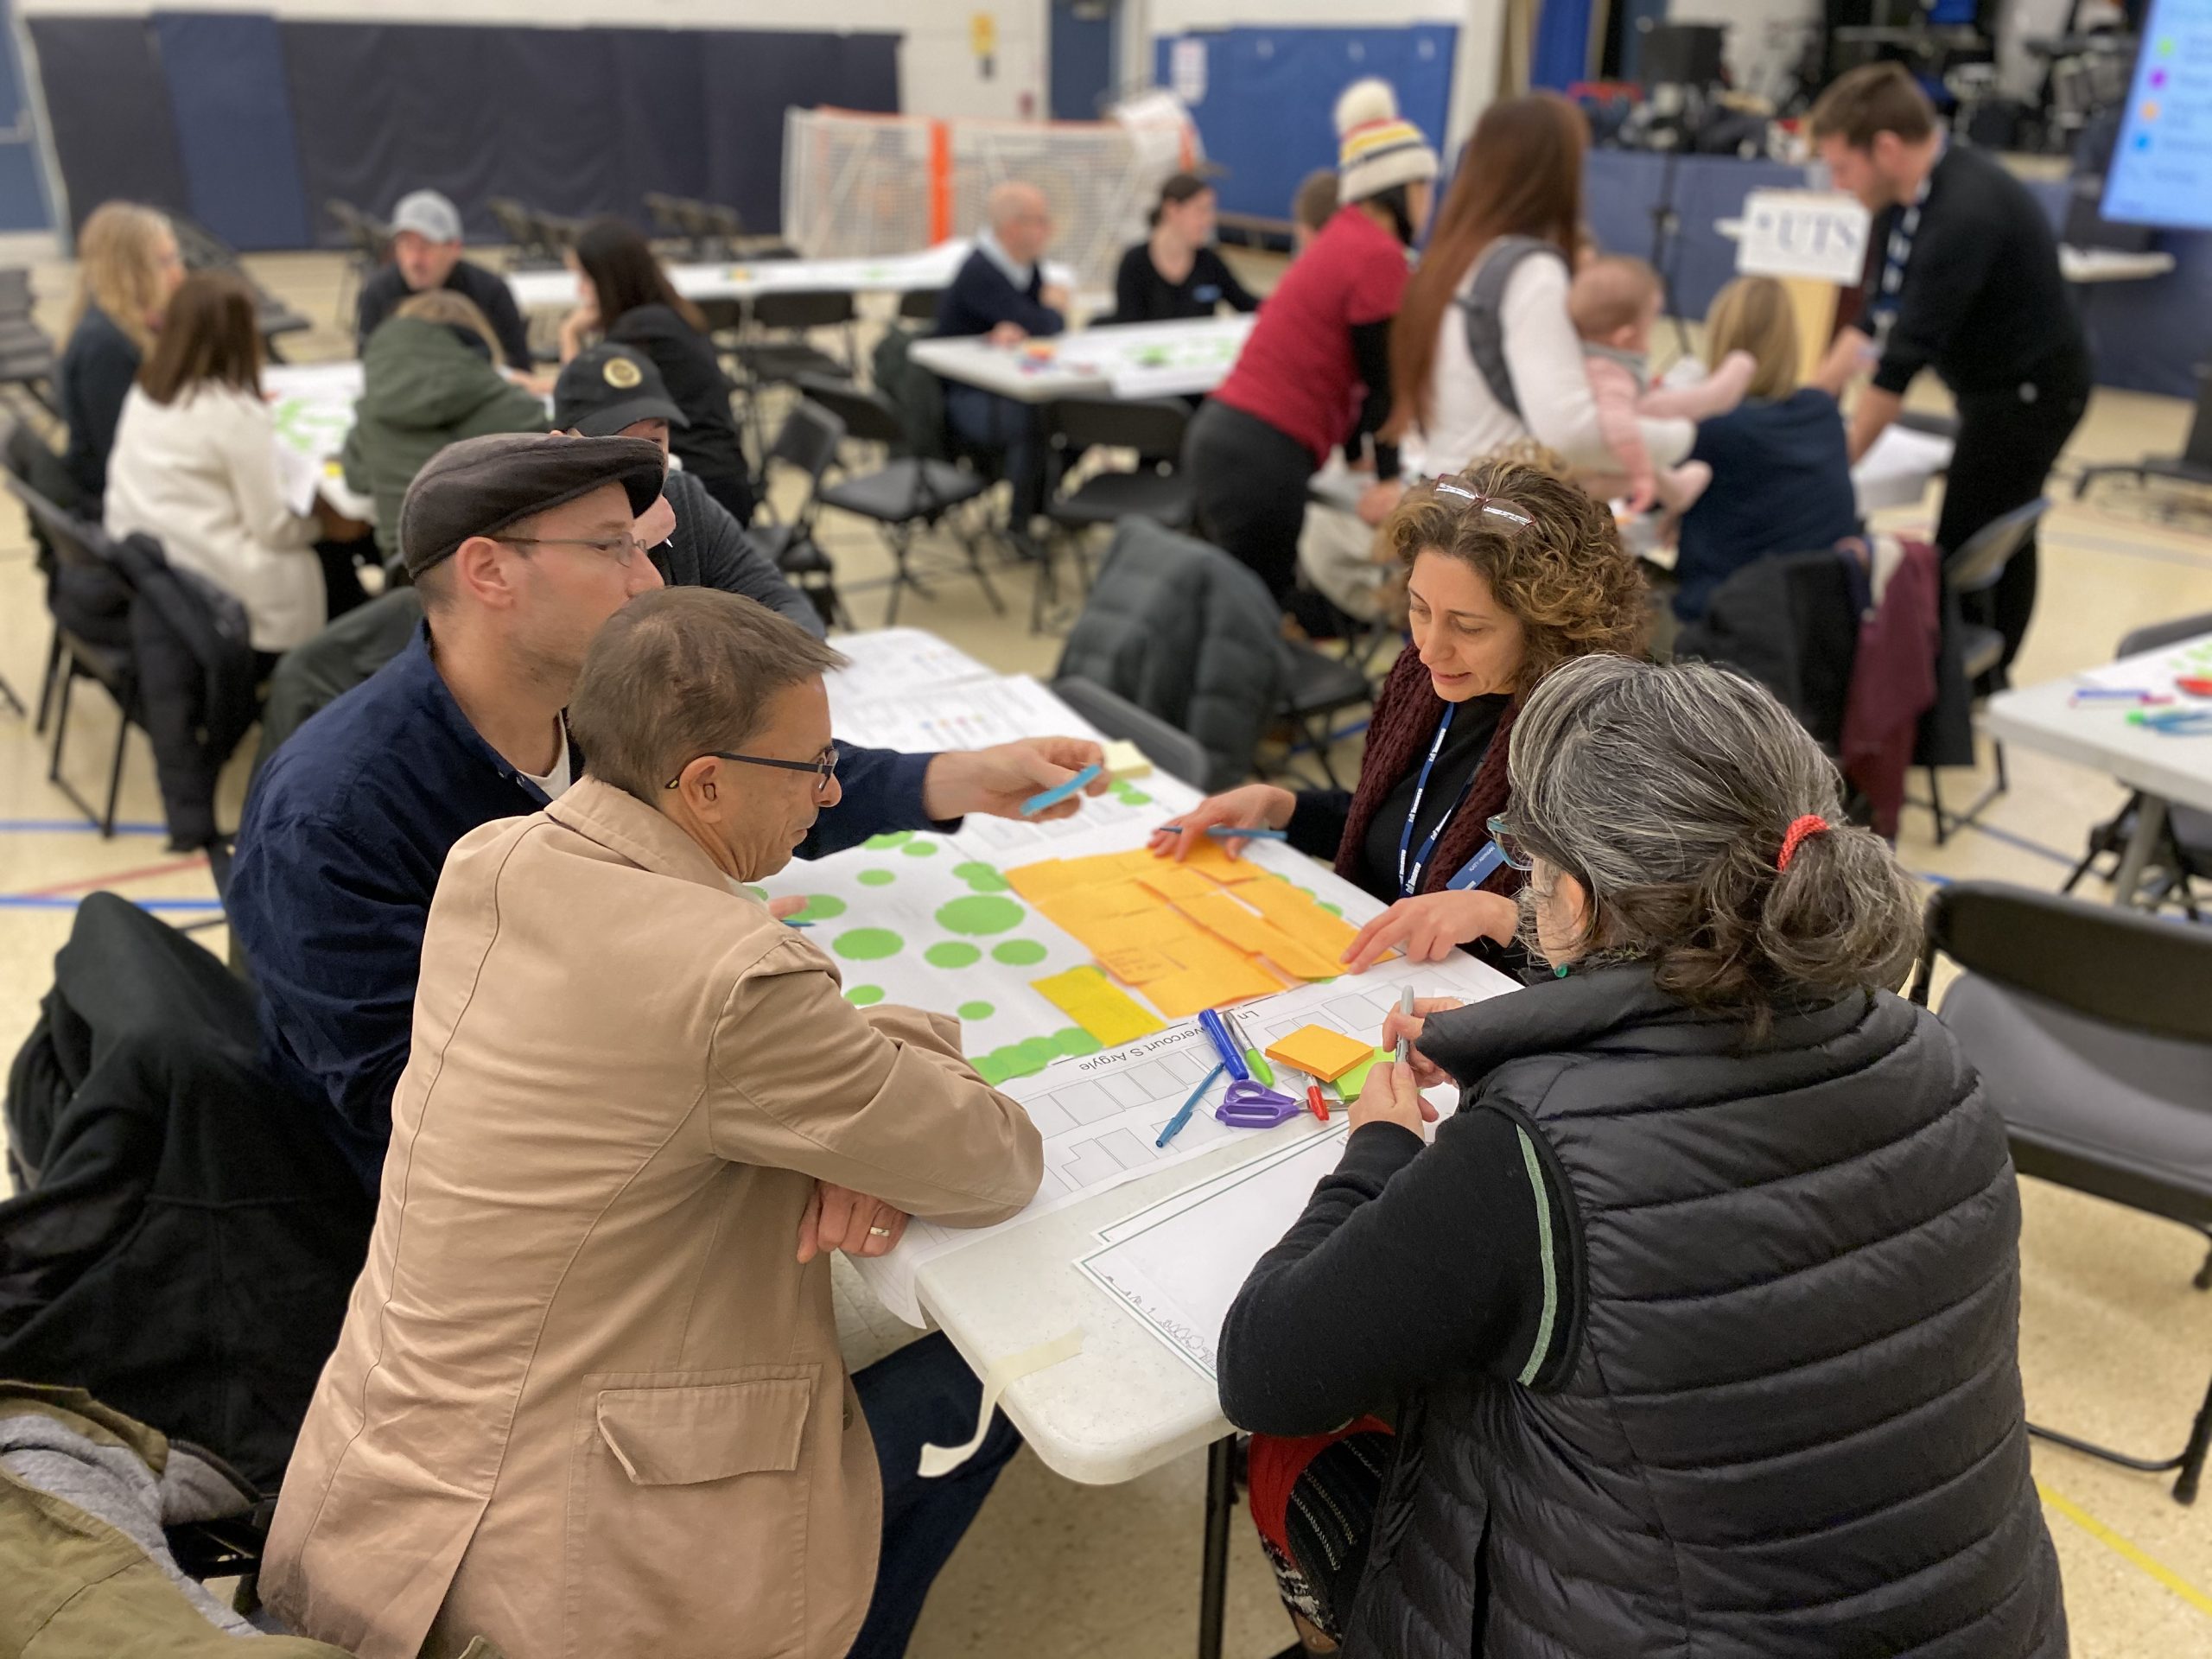 Workshop participants sitting at a table place orange sticky notes on a large map of Osler Playground Park. Several other groups of participants can be seen working at tables in the background.